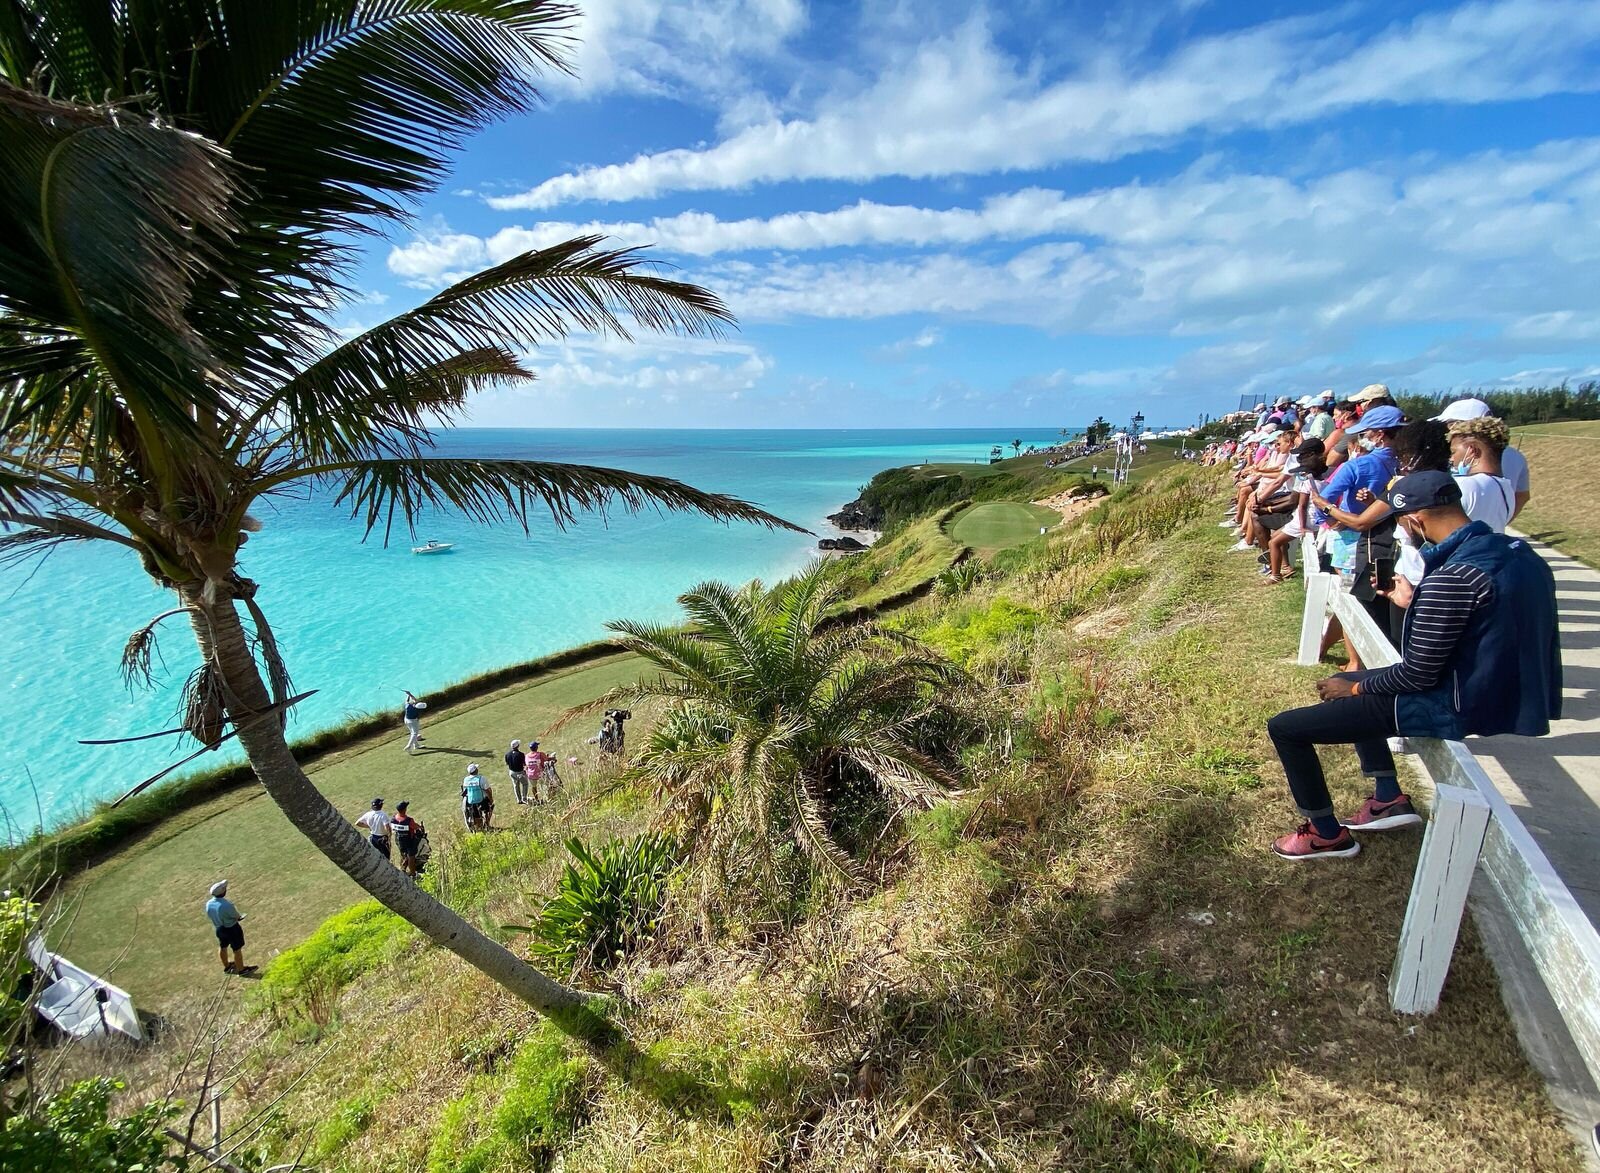  SOUTHAMPTON, BERMUDA - NOVEMBER 01: Wyndham Clark of the United States plays his shot from the 16th tee during the final round of the Bermuda Championship at Port Royal Golf Course on November 01, 2020 in Southampton, Bermuda. (Photo by Gregory Sham